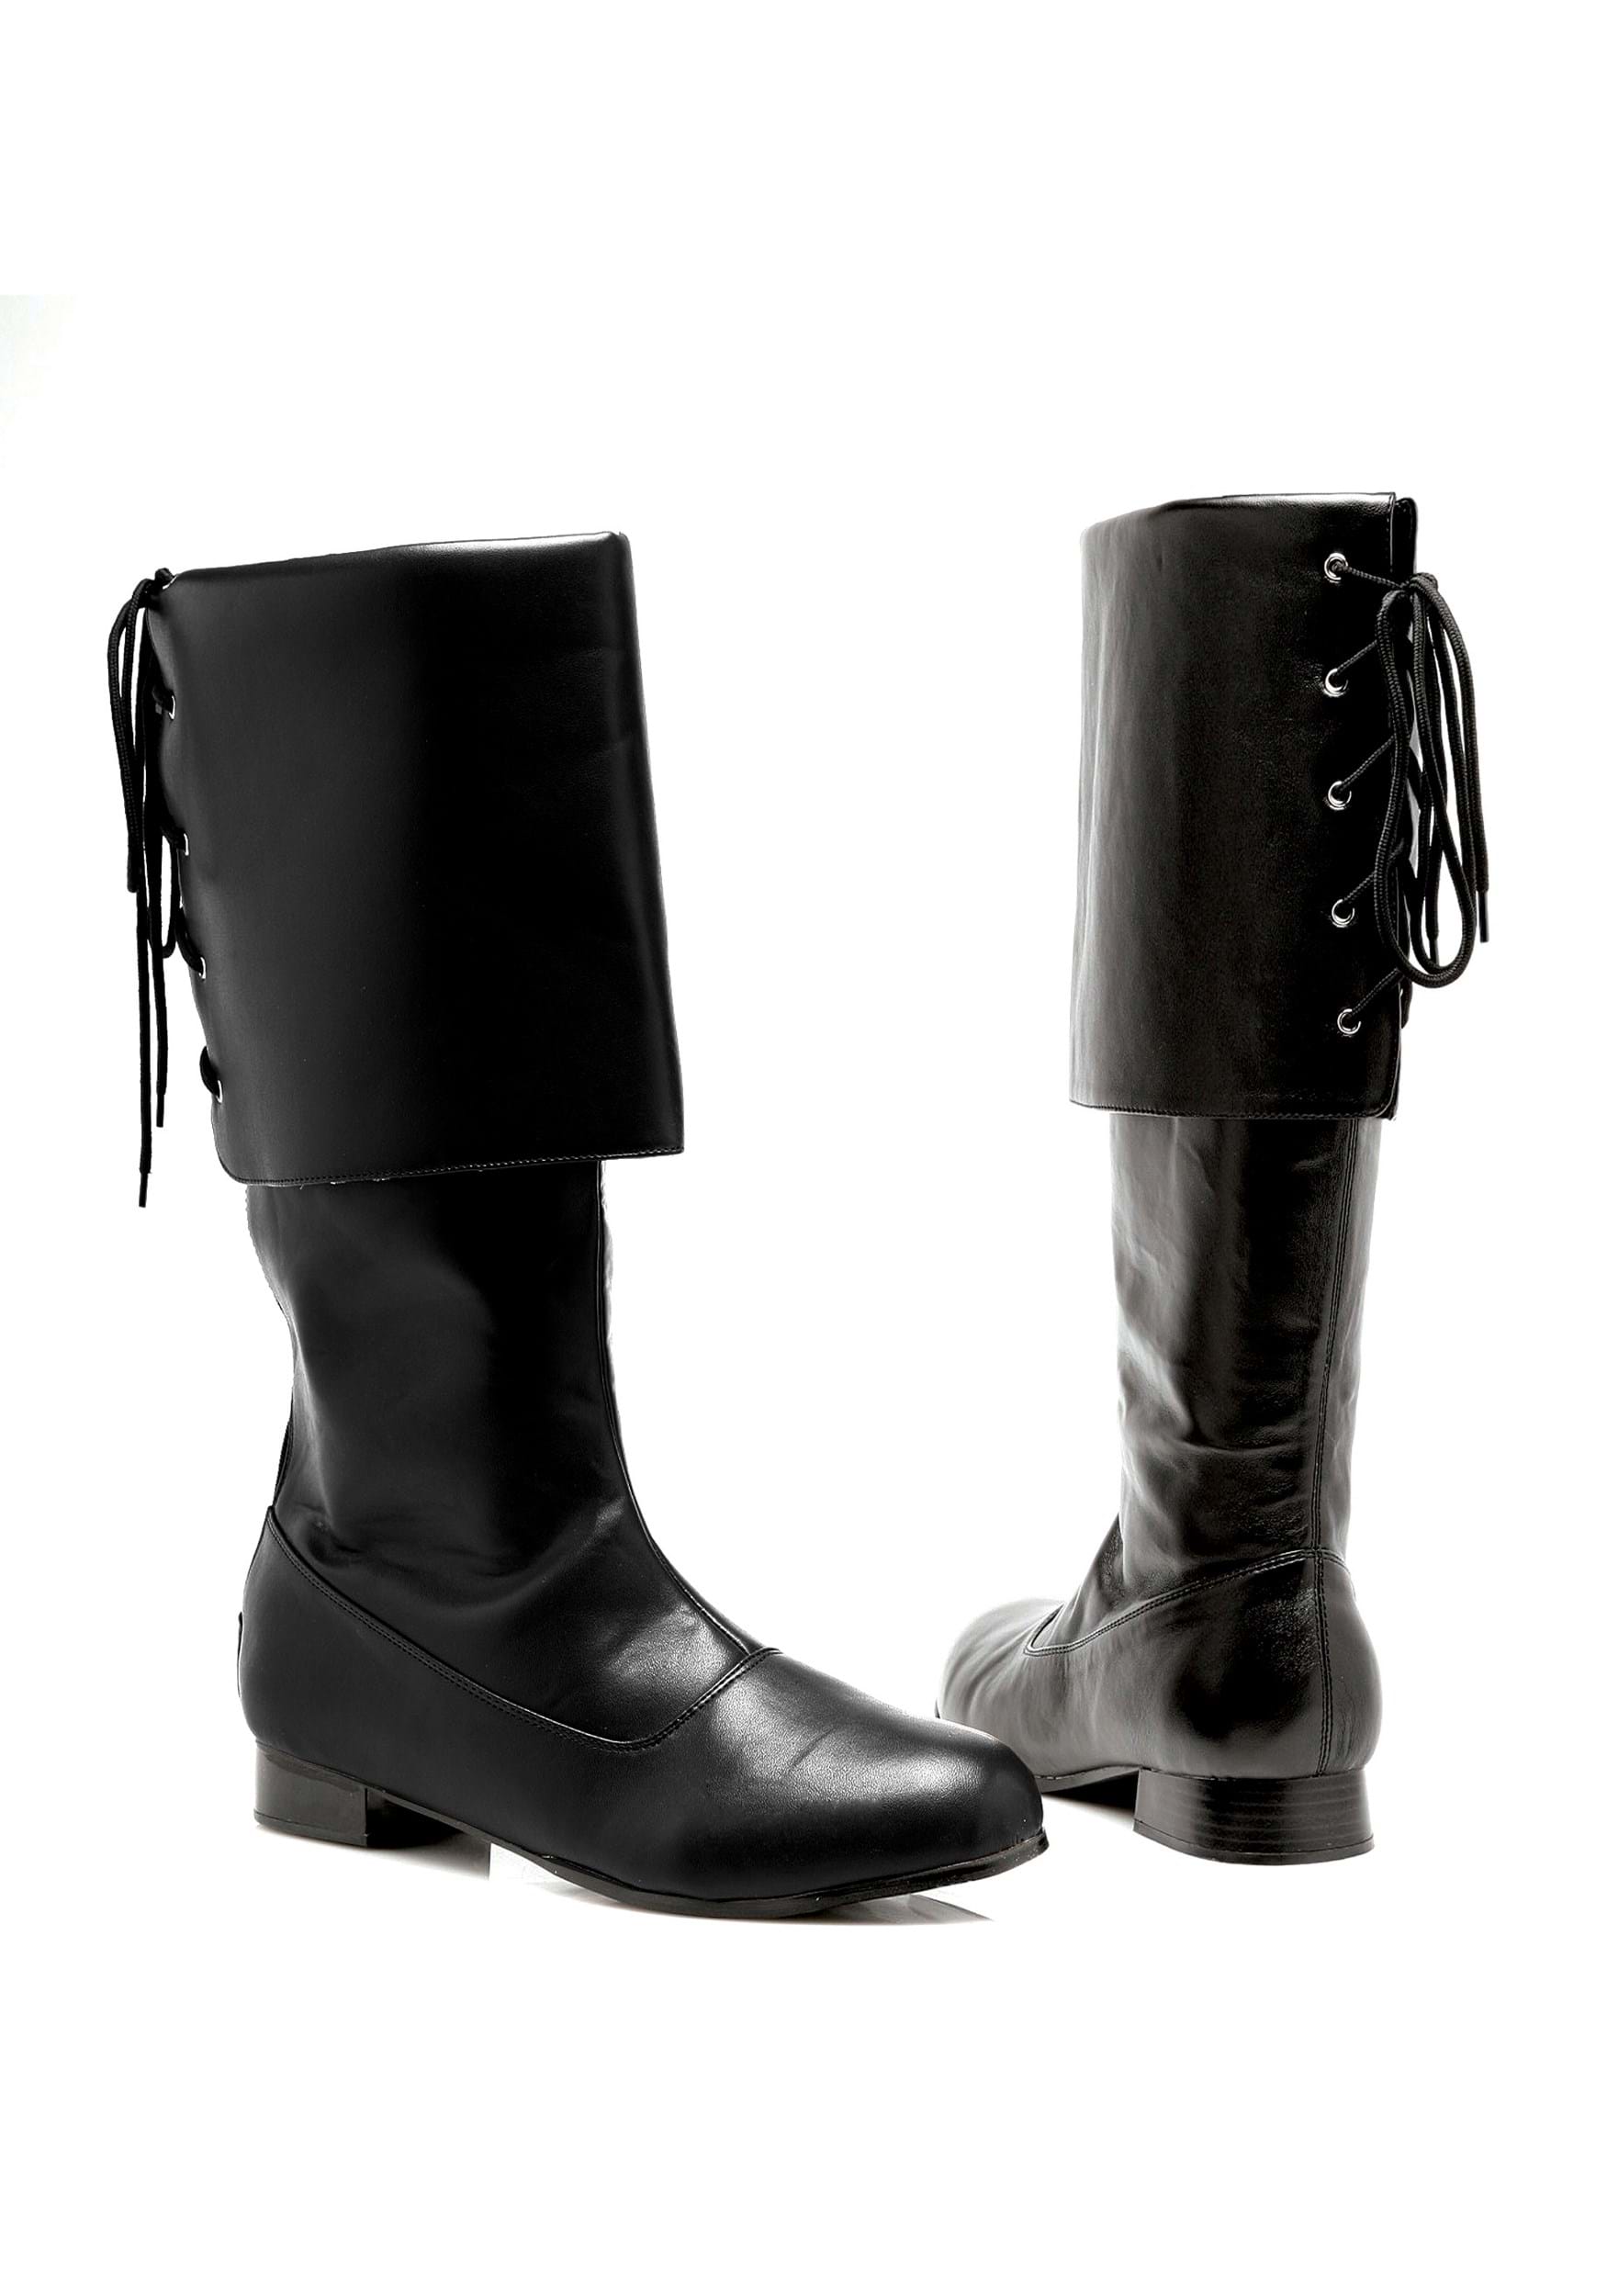 Image of Women's Black Pirate Boots ID EE121SPARROW-L